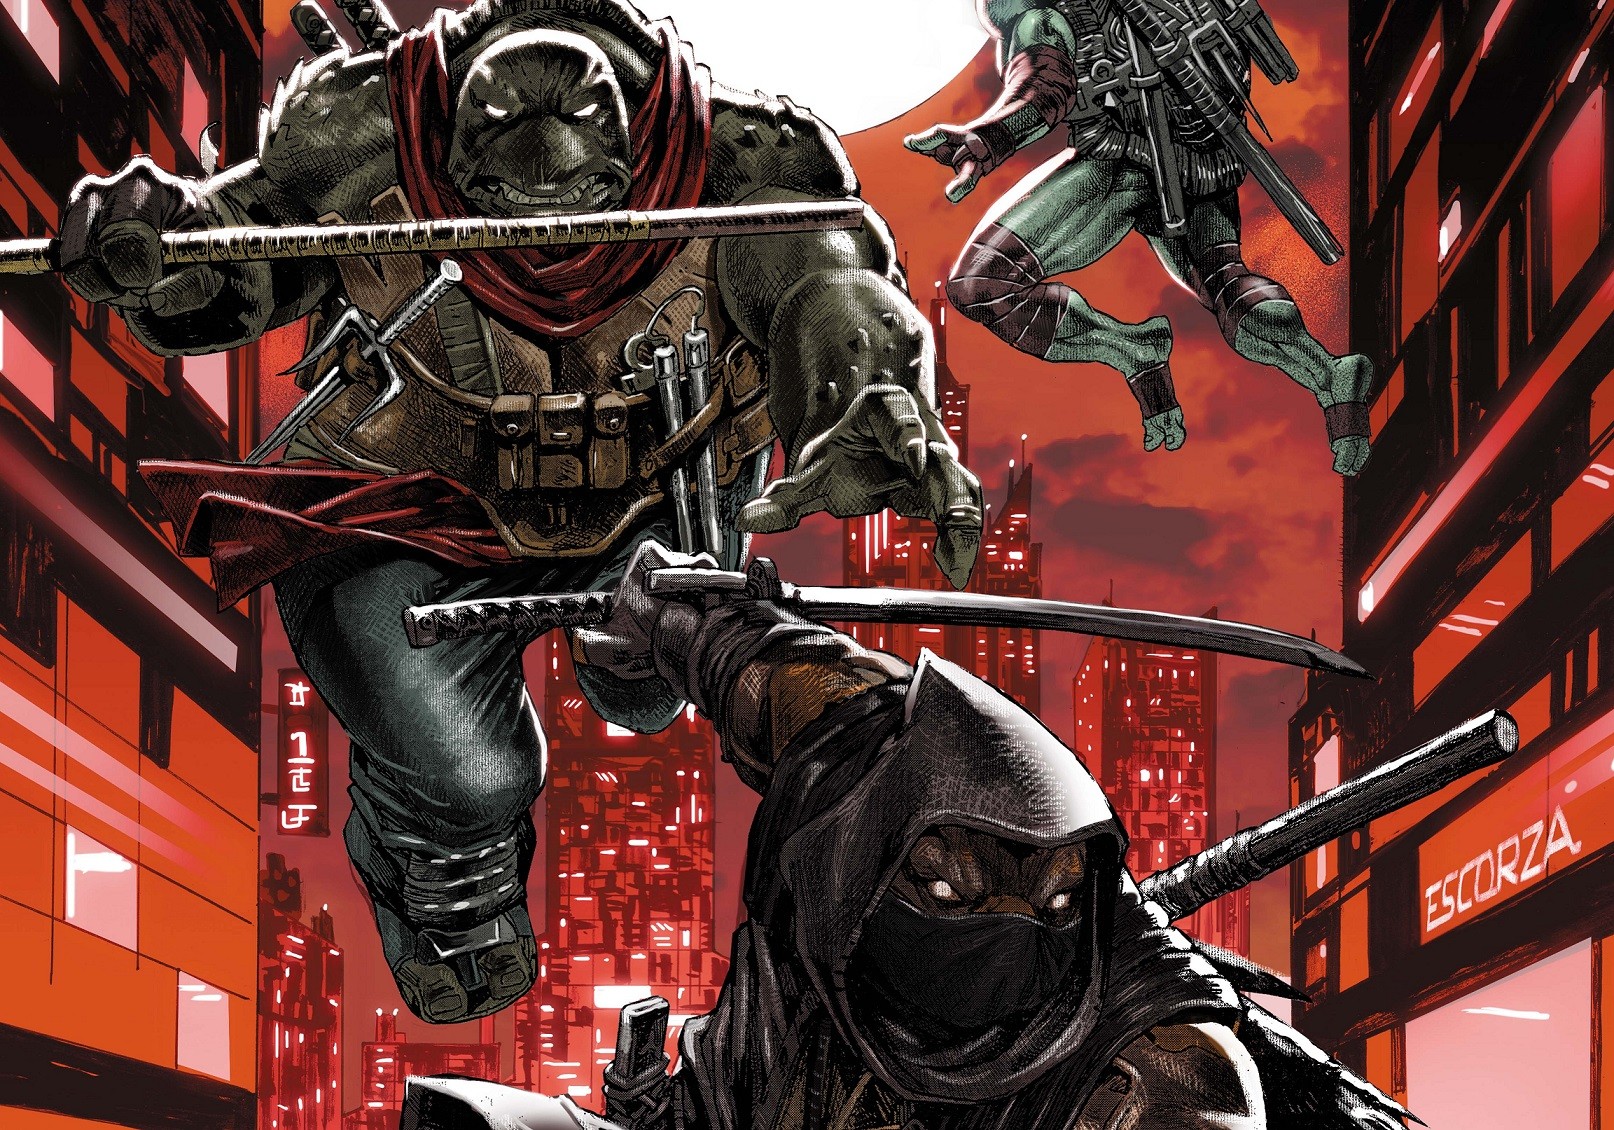 TMNT The Last Ronin sequel coming soon from Nickelodeon and IDW Publishing   Popverse